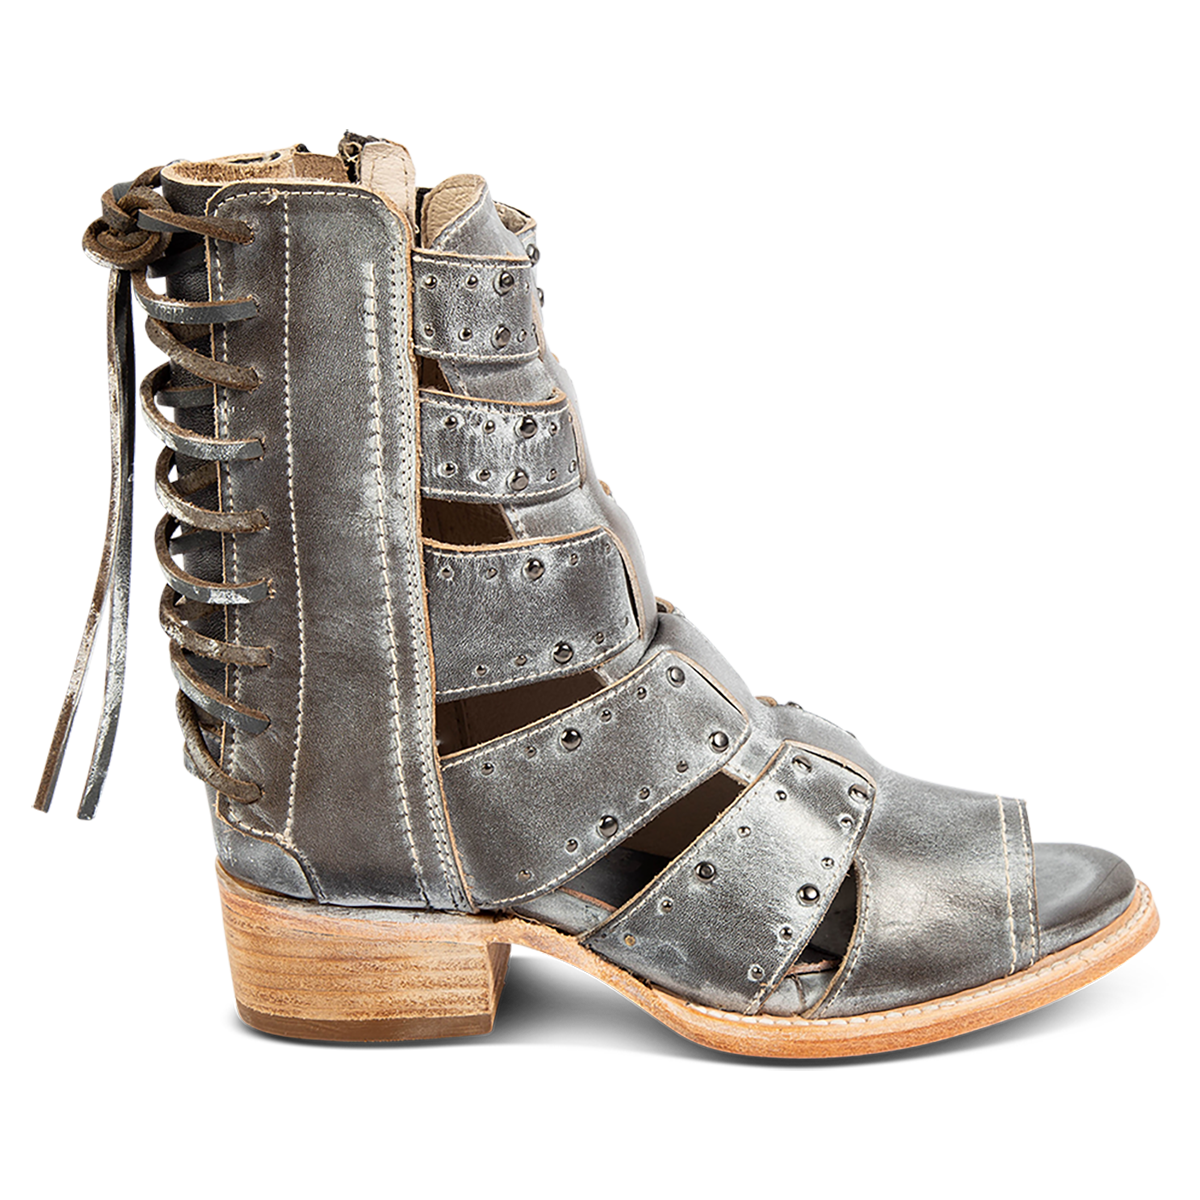 FREEBIRD women's Ghost ice sandal with an inside working brass zipper, back panel lacing and an exposed exterior